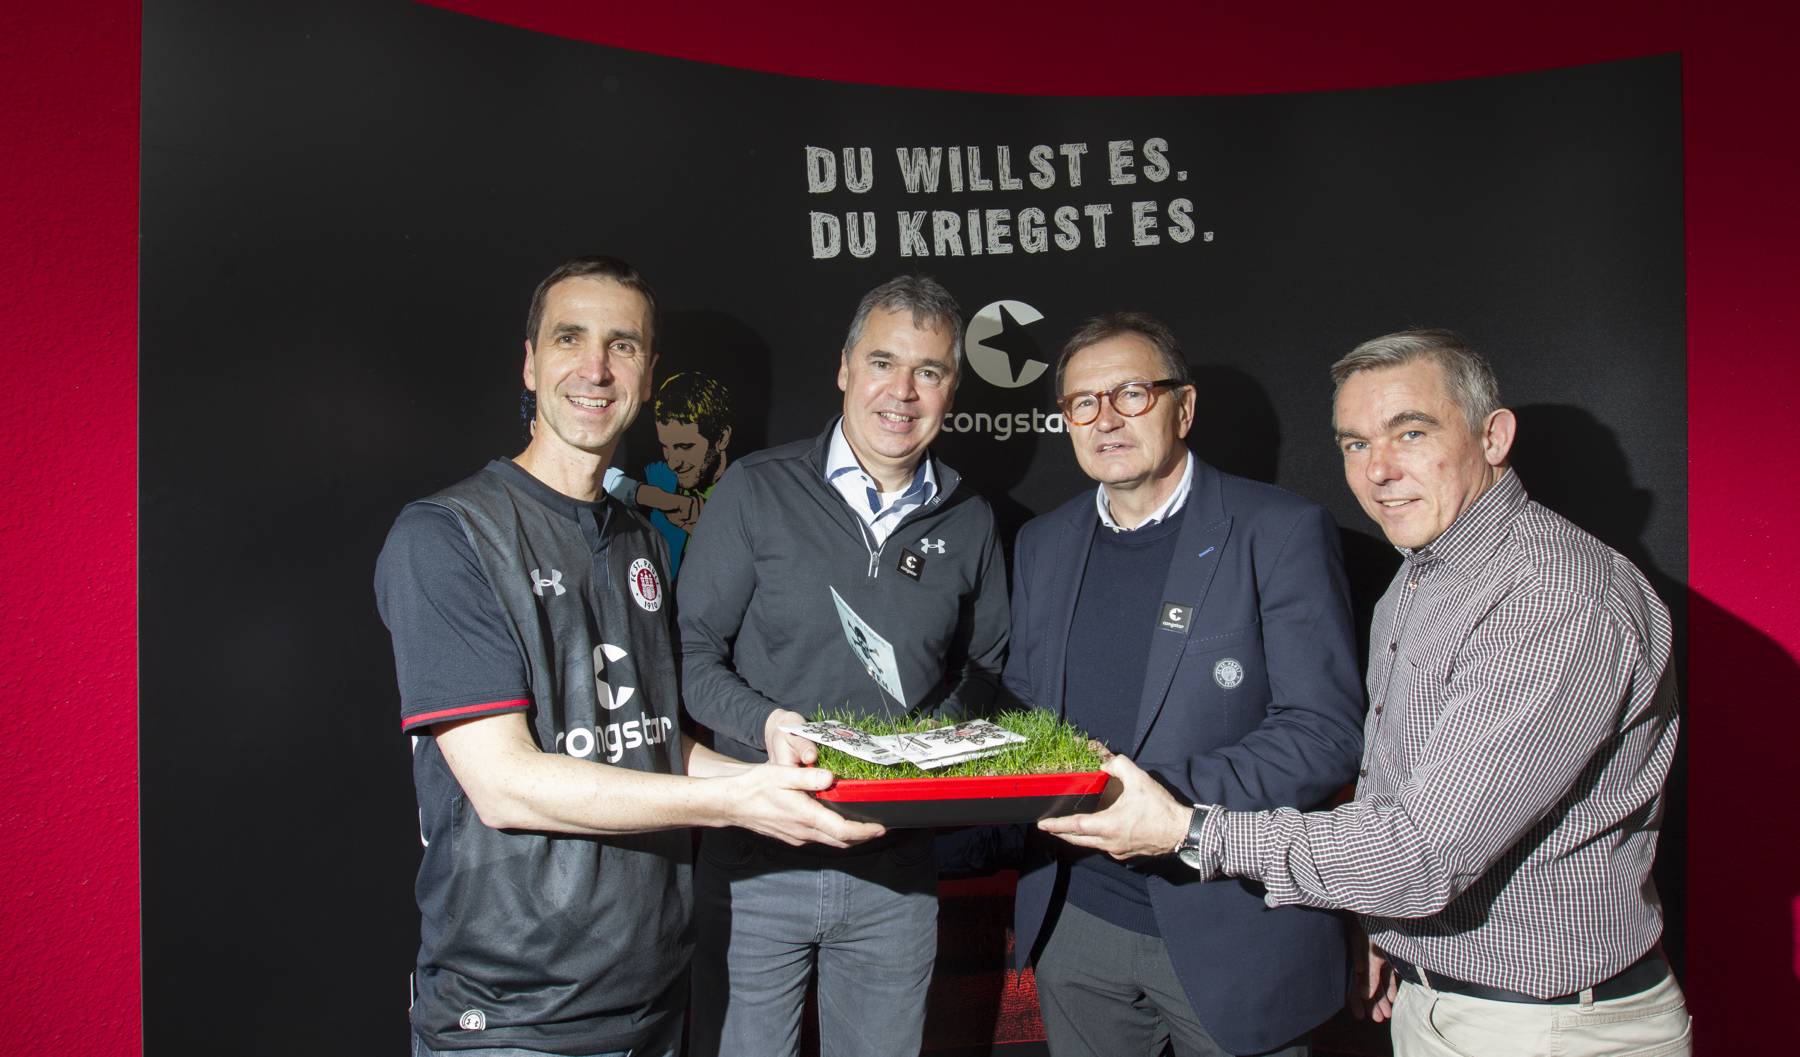 Before the friendly at Borussia Mönchengladbach the Boys in Brown visited Congstar in Cologne. Captain Sören Gonther presented the sponsors with a piece of turf.